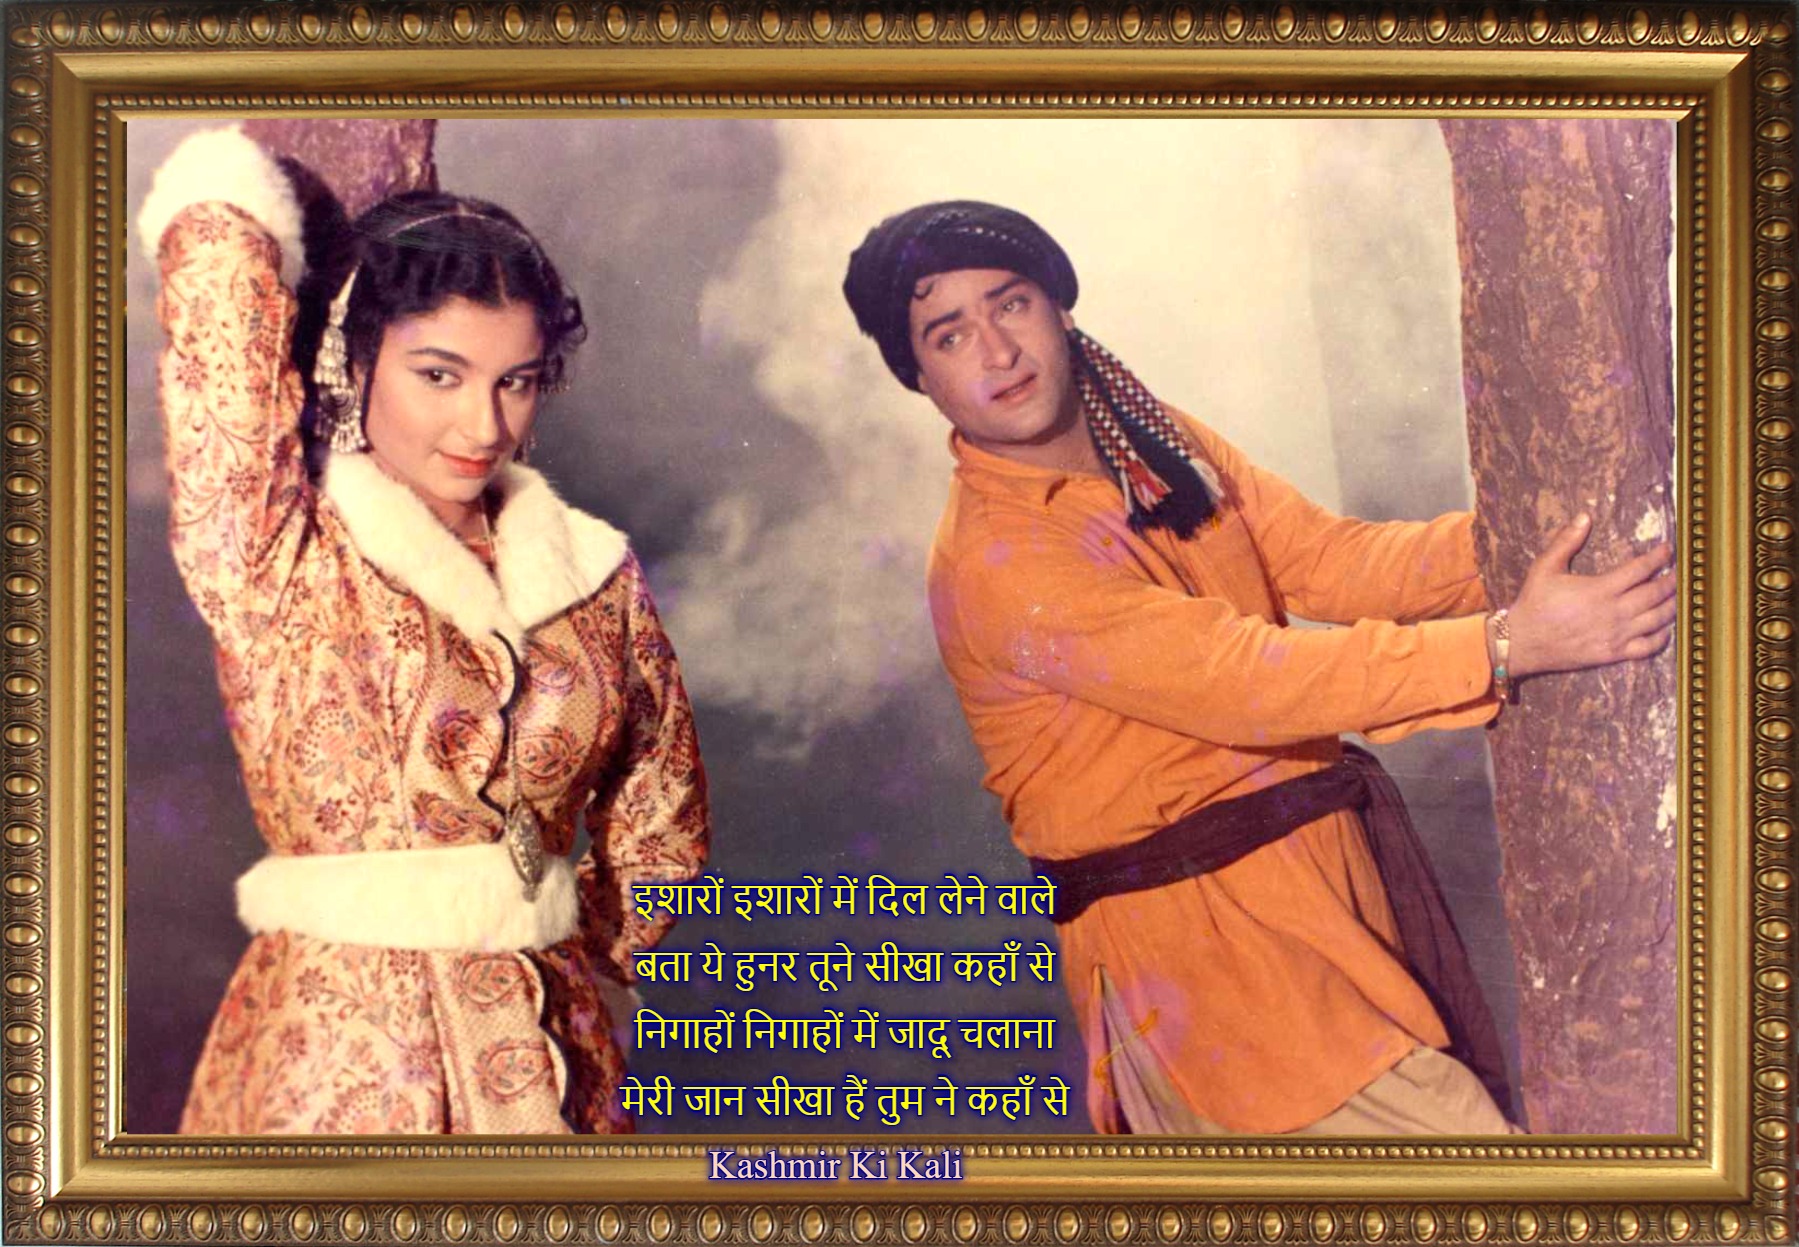 You are currently viewing “Simple, Suave & Gifted With Exceptional Qualities- Mohd Rafi”